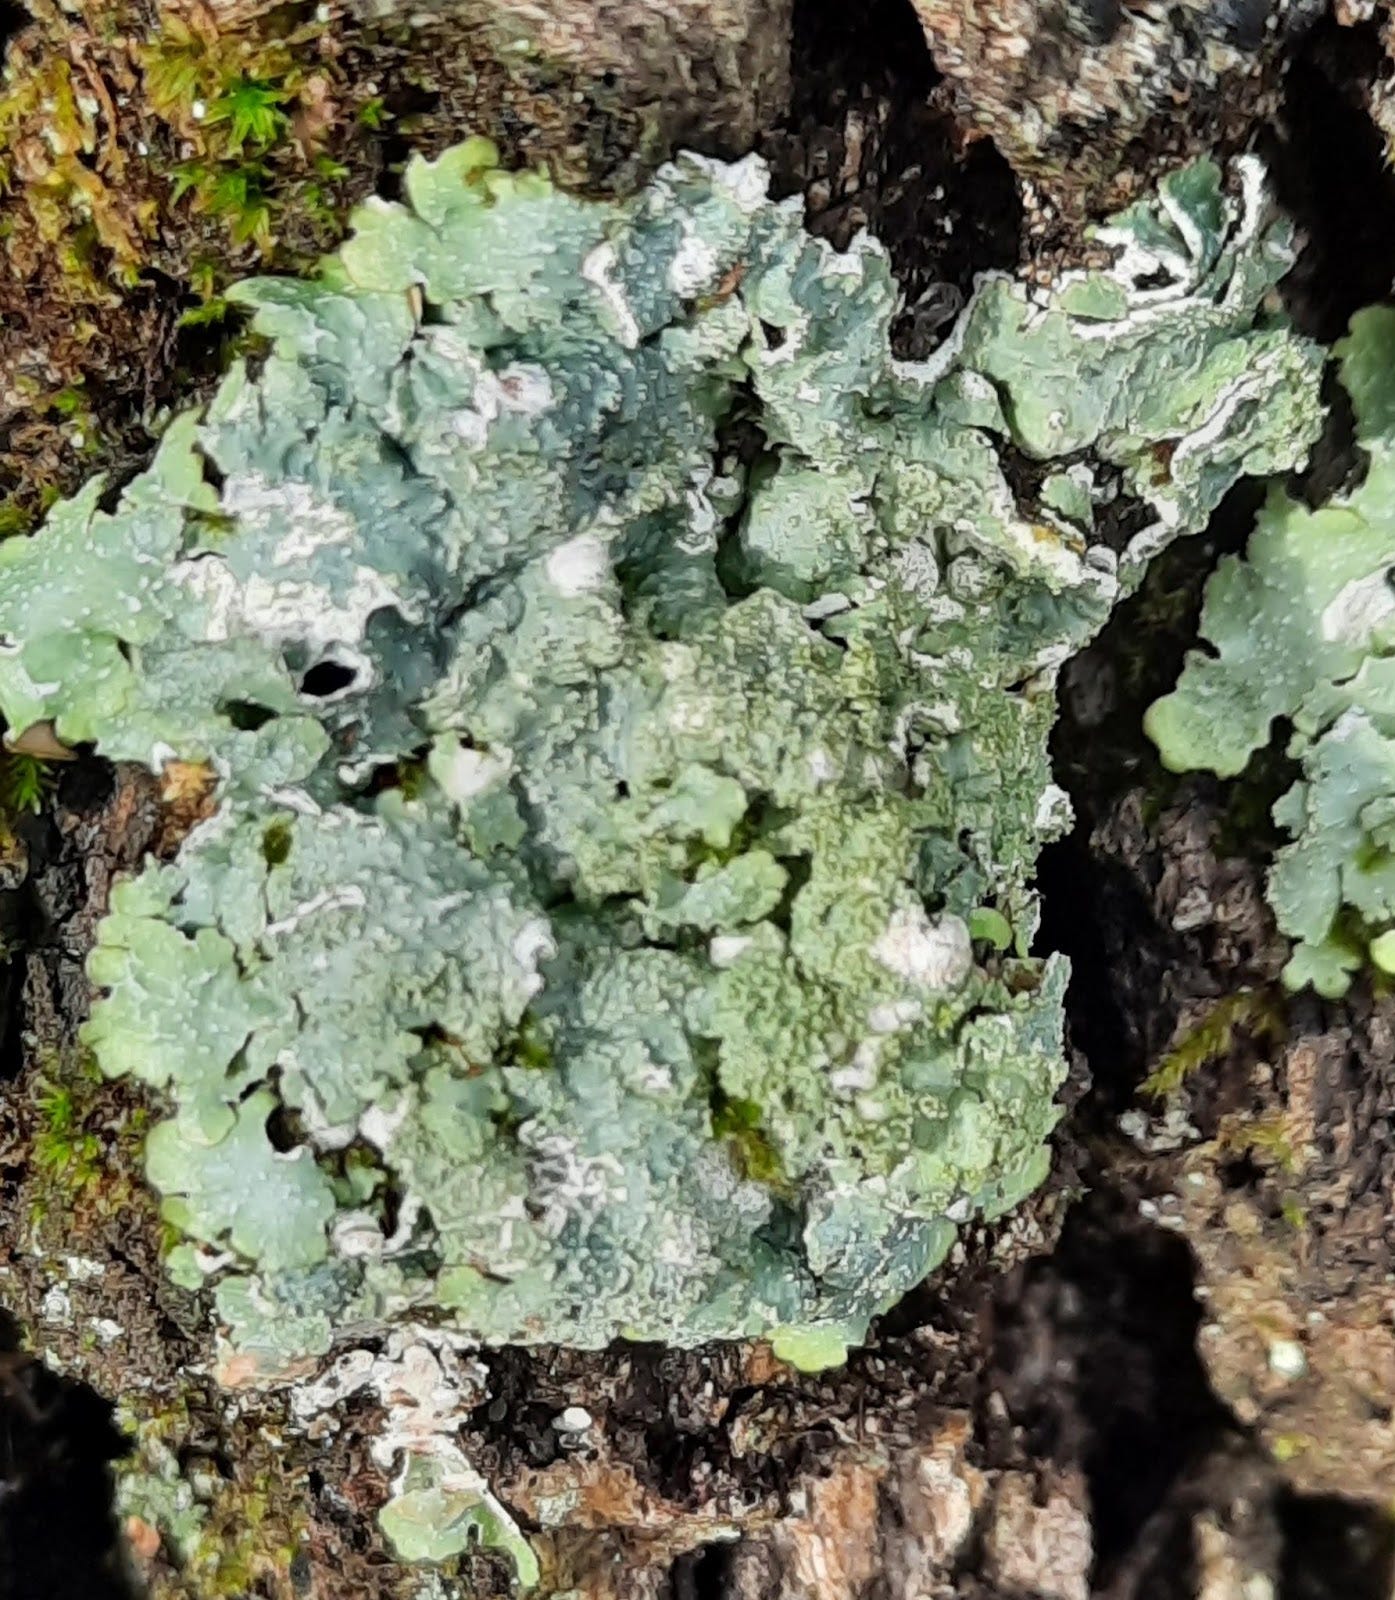 The lichen is light green, surrounded by dark green moss and grey bark.